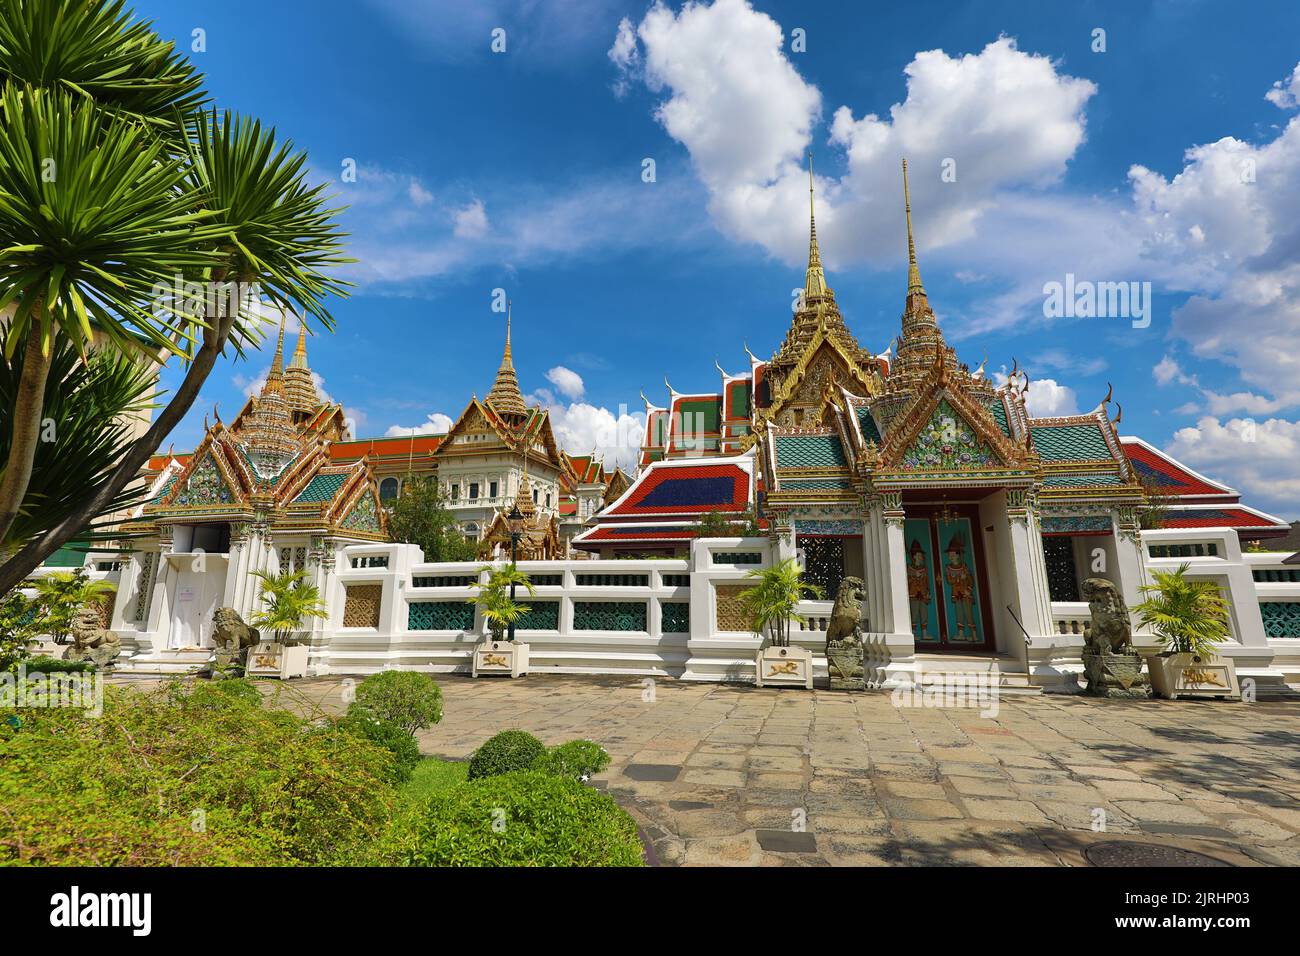 The Grand Palace in the Grand Palace Complex, Wat Phra Kaew, Bangkok, Thailand Stock Photo